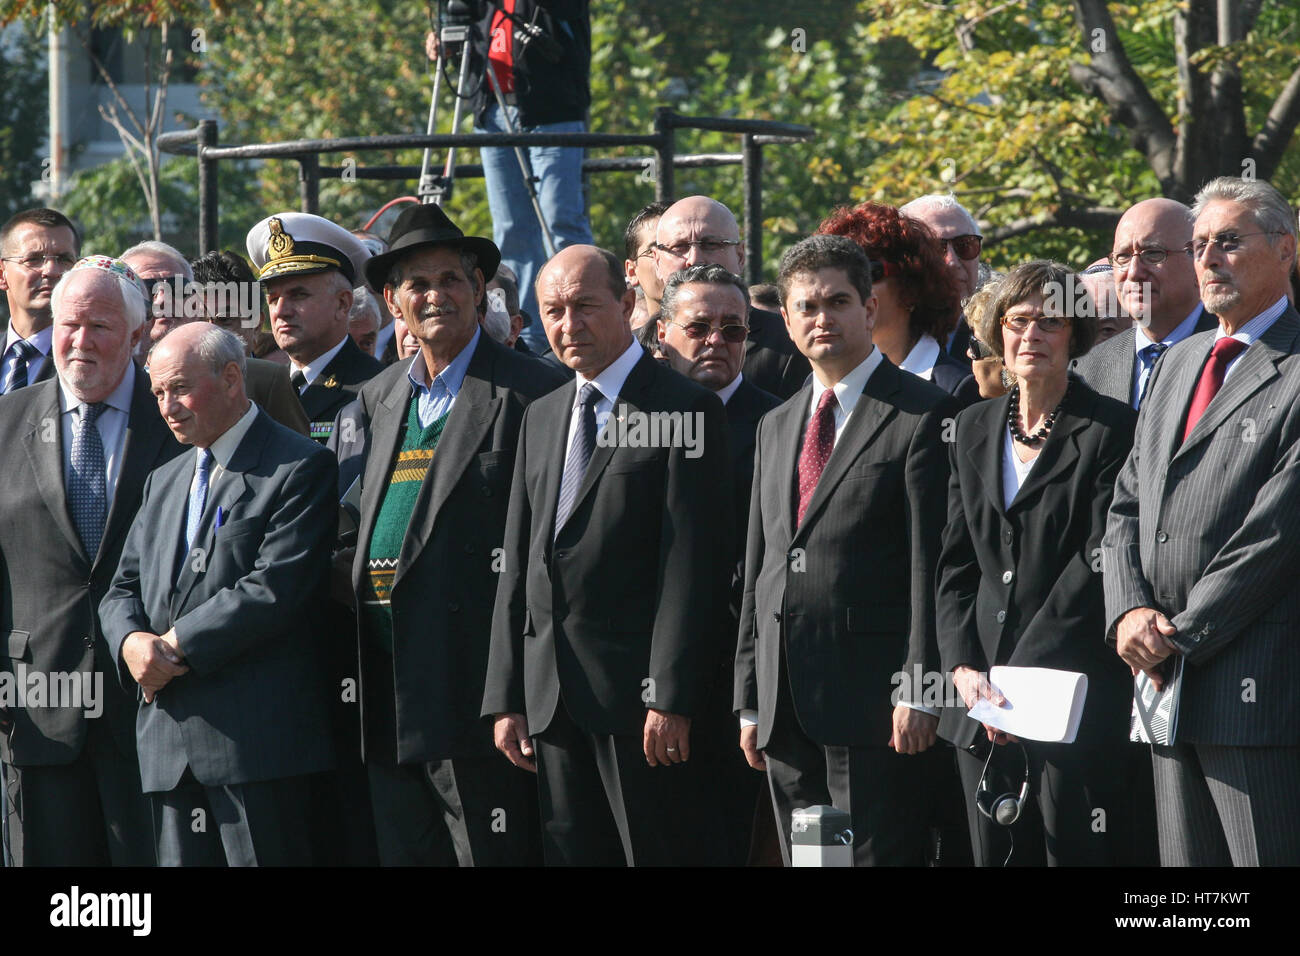 Bucharest, Romania, October 8, 2009: Traian Basescu (C), Emil Constantinescu (R), Theodor Paleologu (C right) and other officials participate at the o Stock Photo